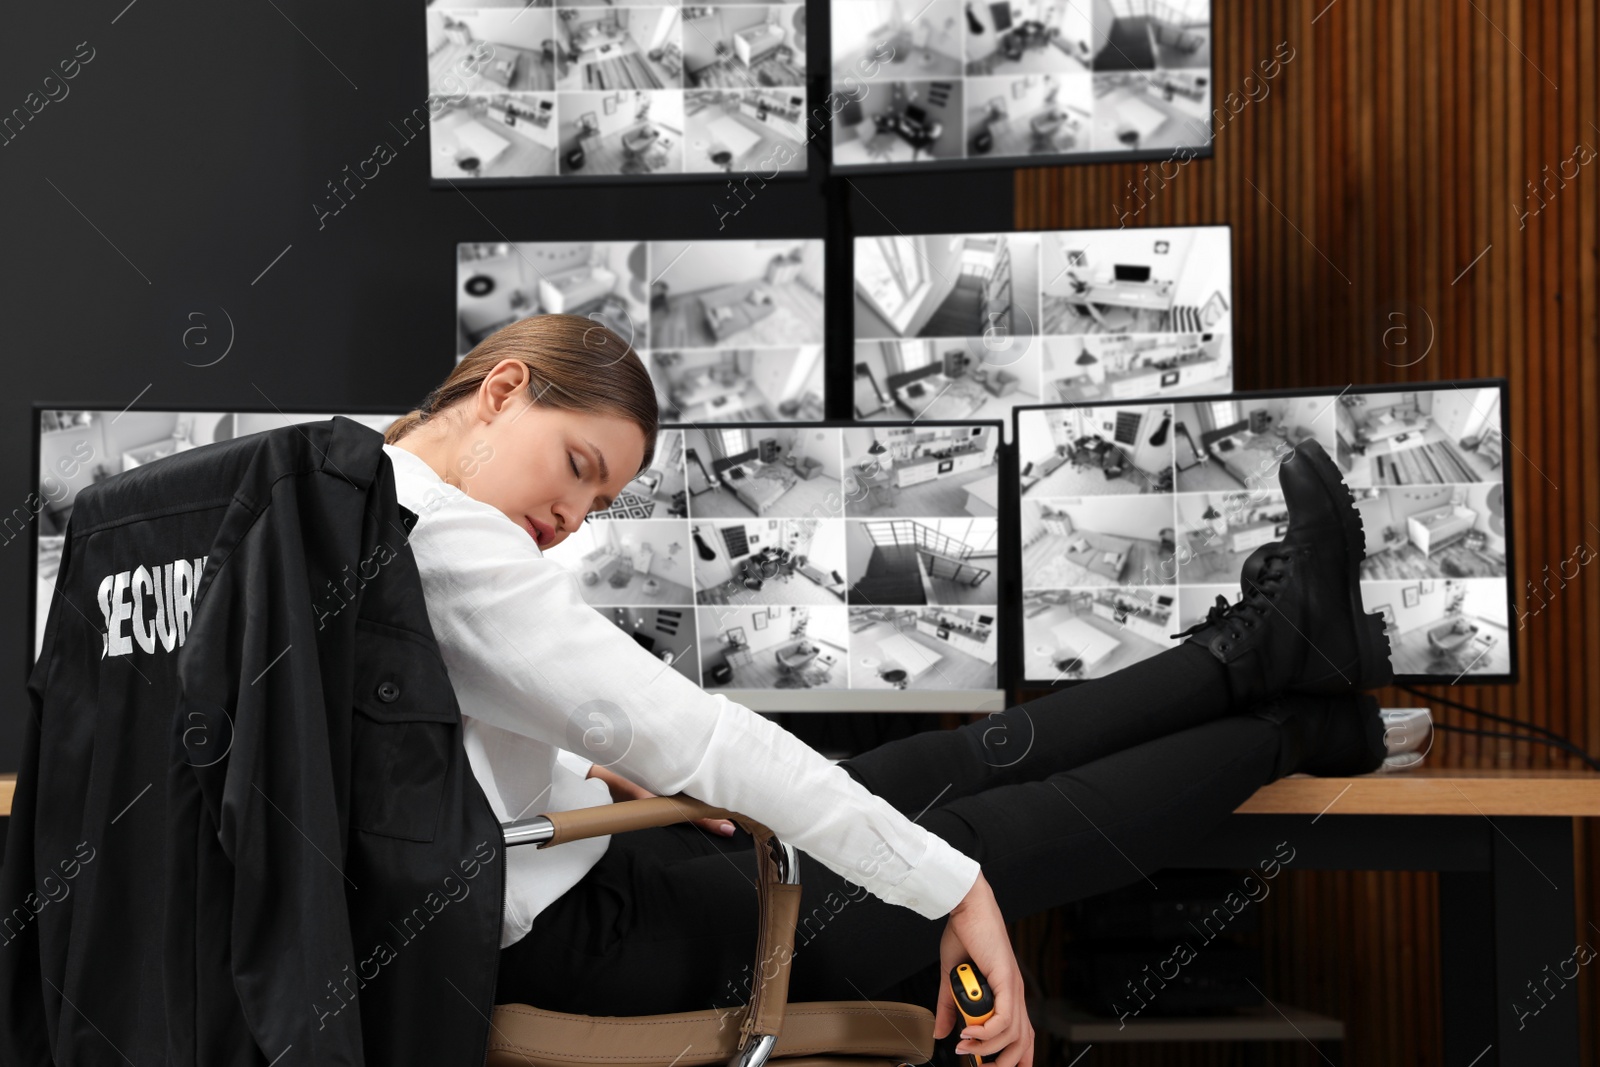 Photo of Tired security guard sleeping at workplace in office